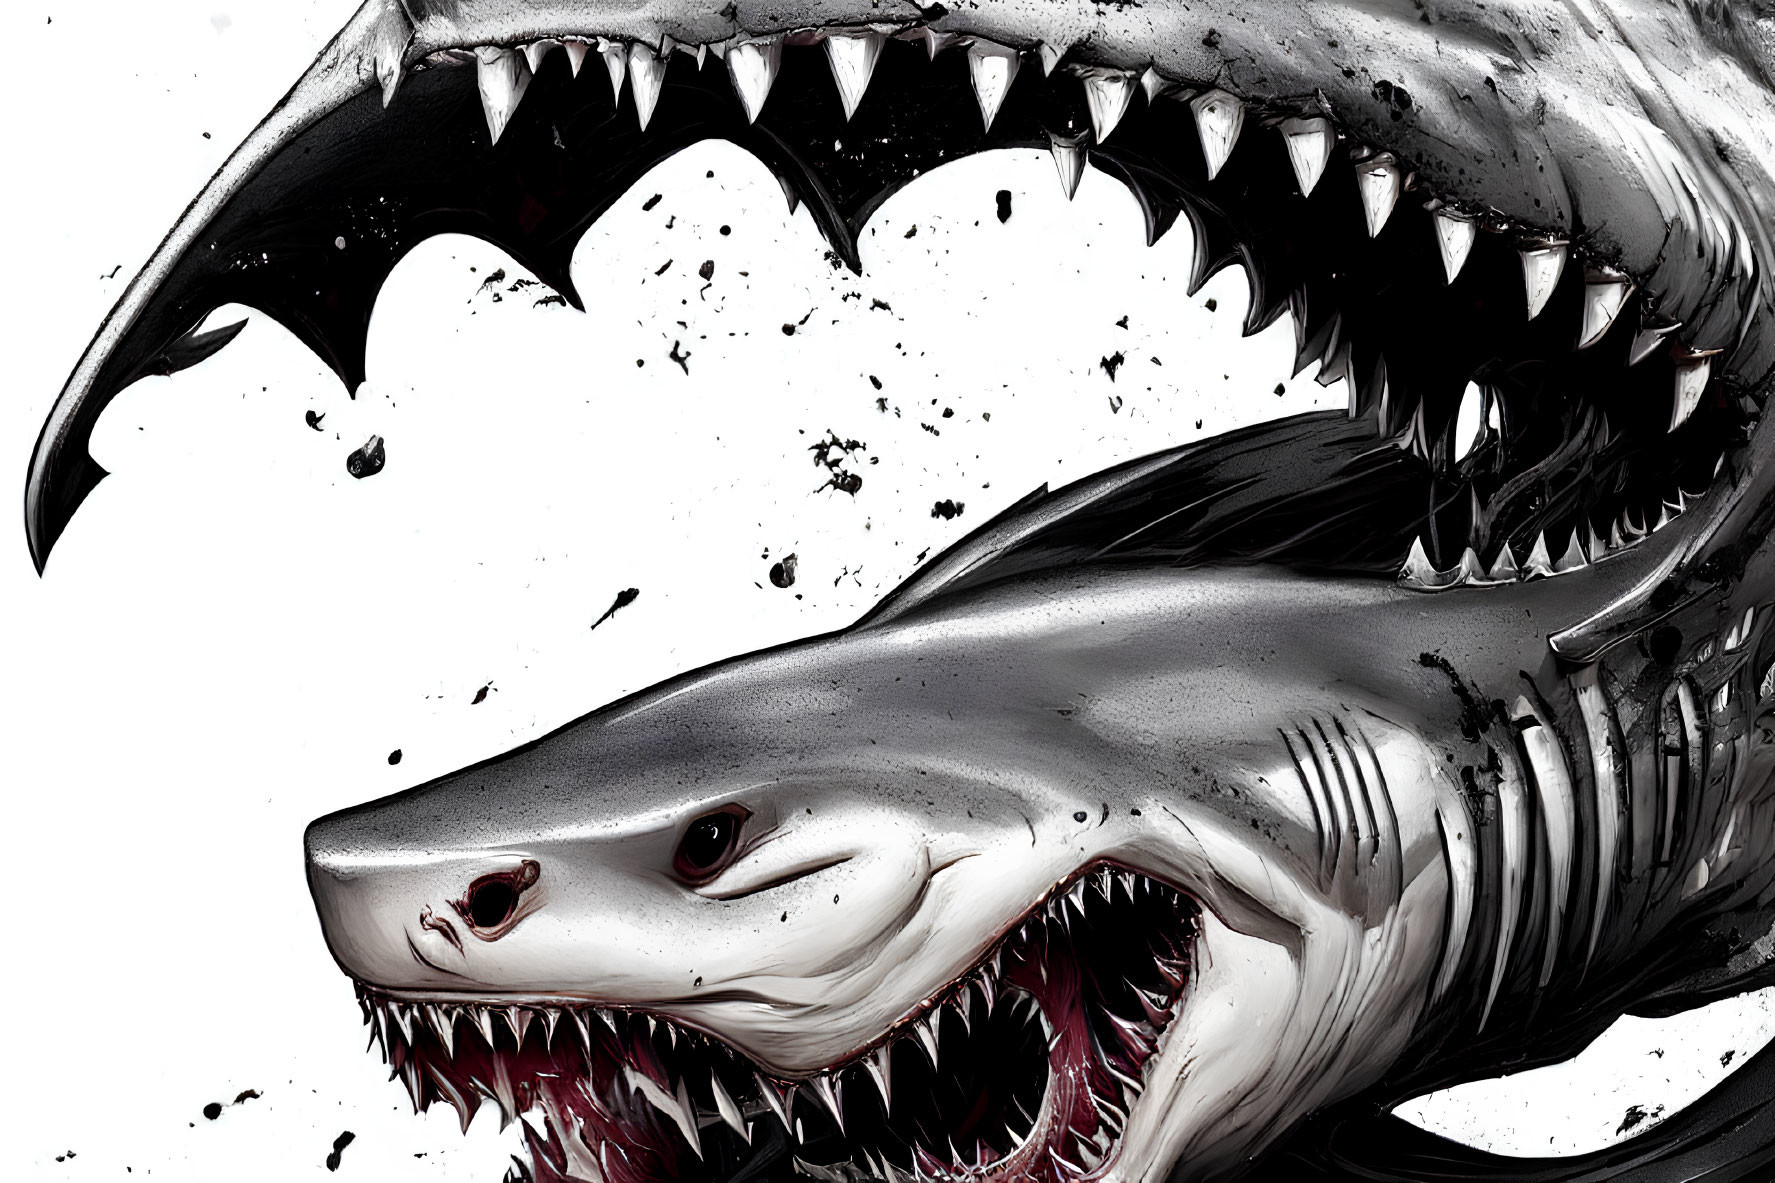 Stylized grayscale shark with sharp teeth and splatter effects